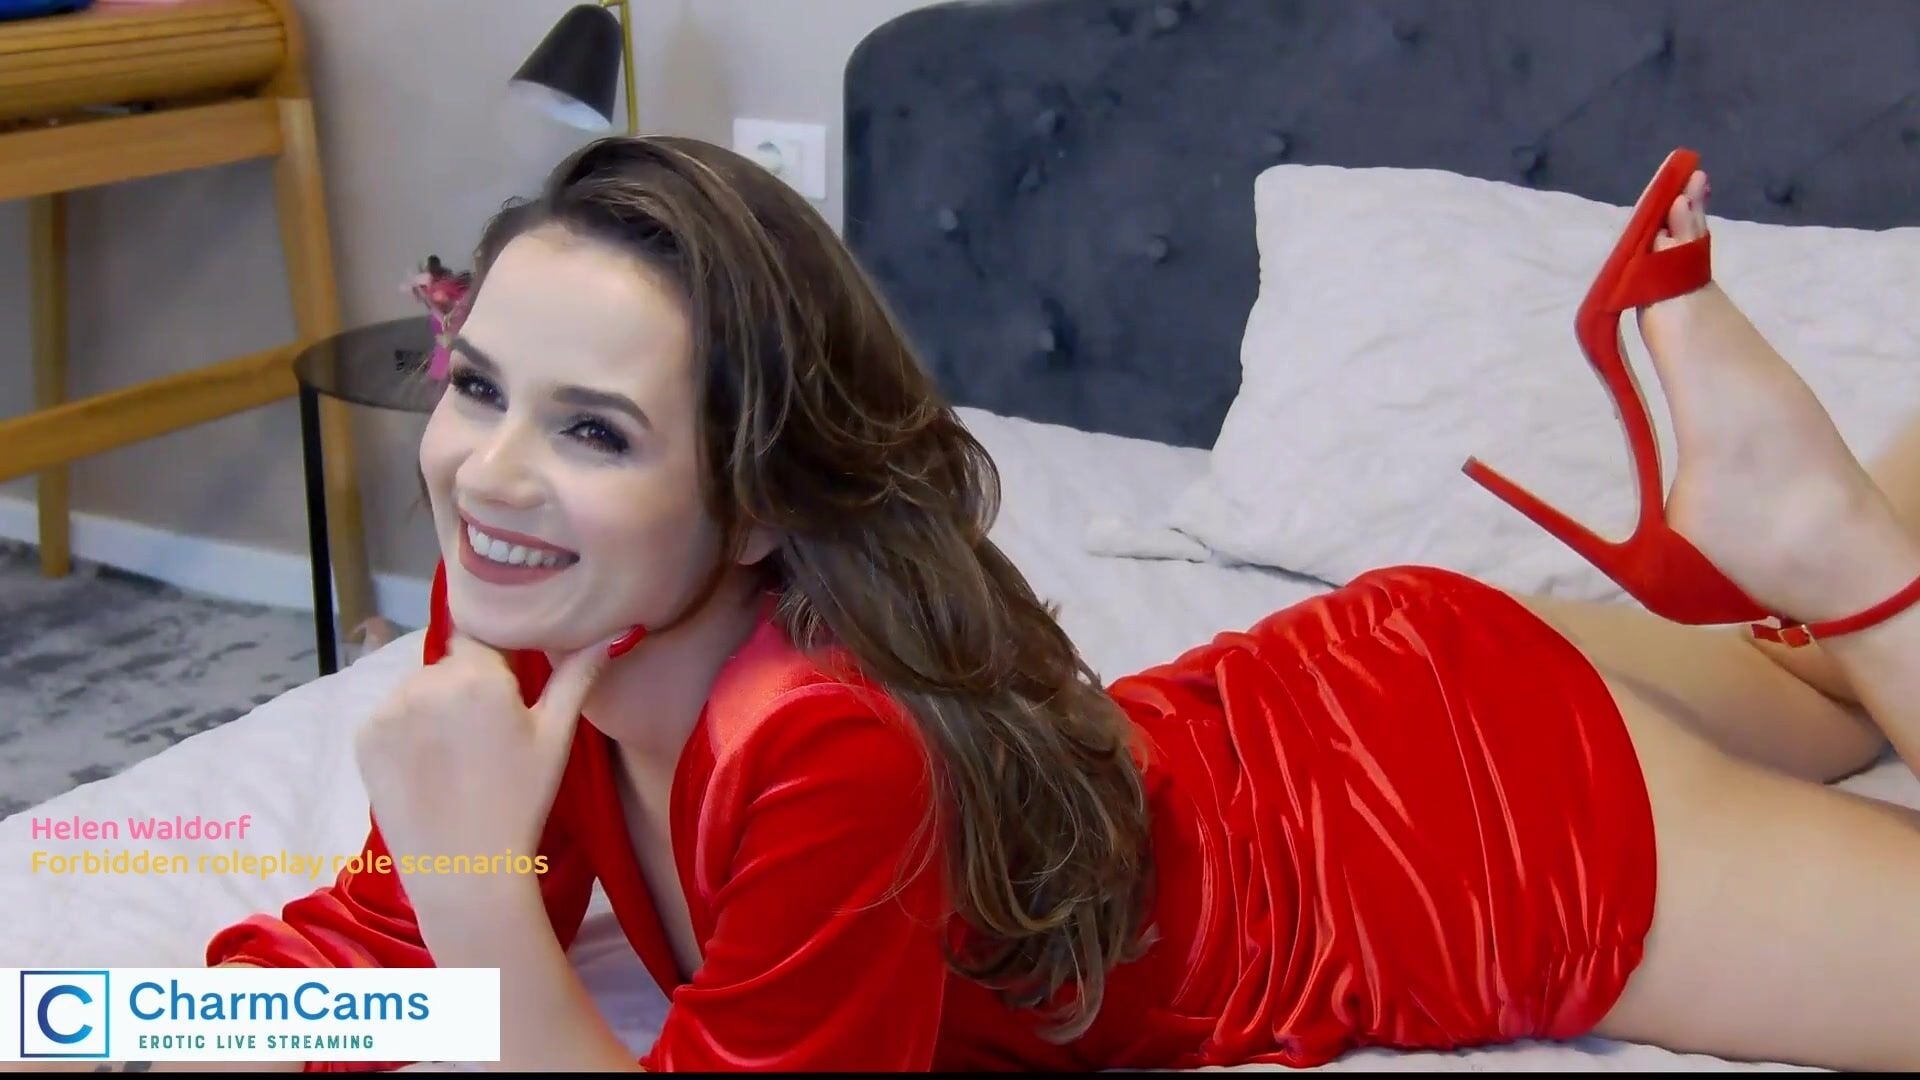 In bed with my red dress. #23